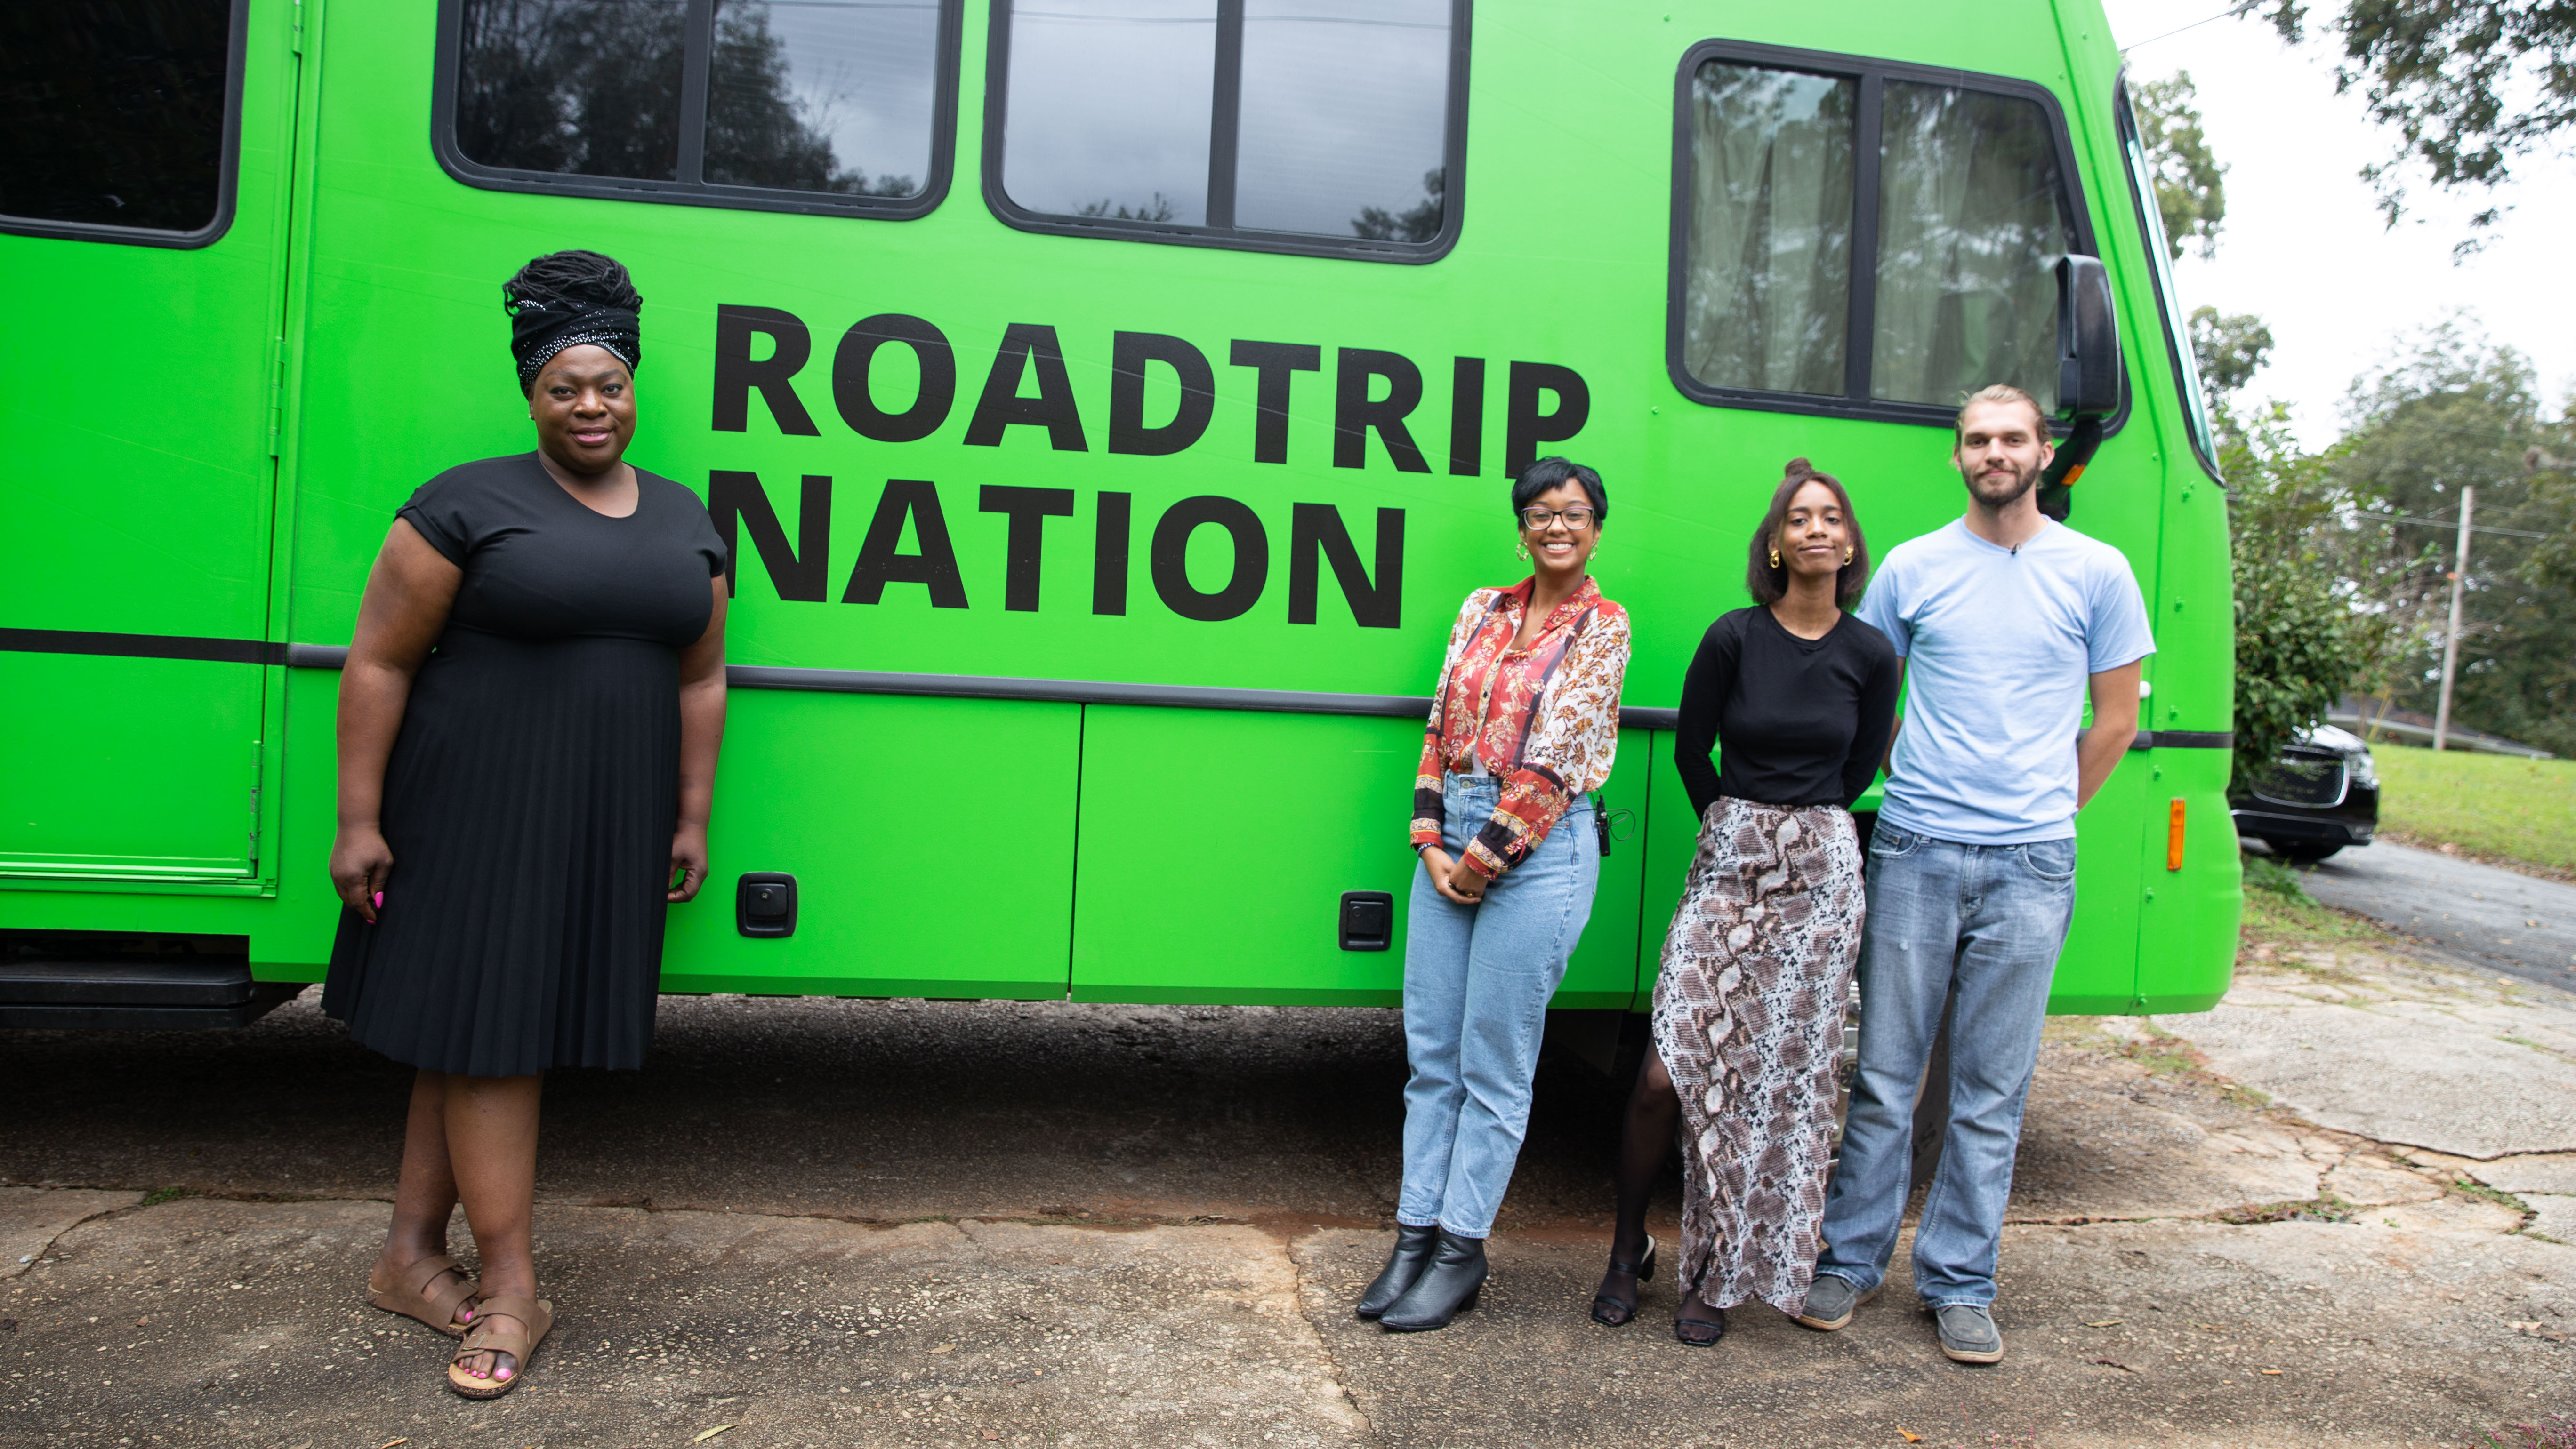 First from left, Tori Cooper, director of community engagement for the Human Rights Campaign’s Transgender Justice Initiative, takes a photo with the roadtrippers outside the green RV.